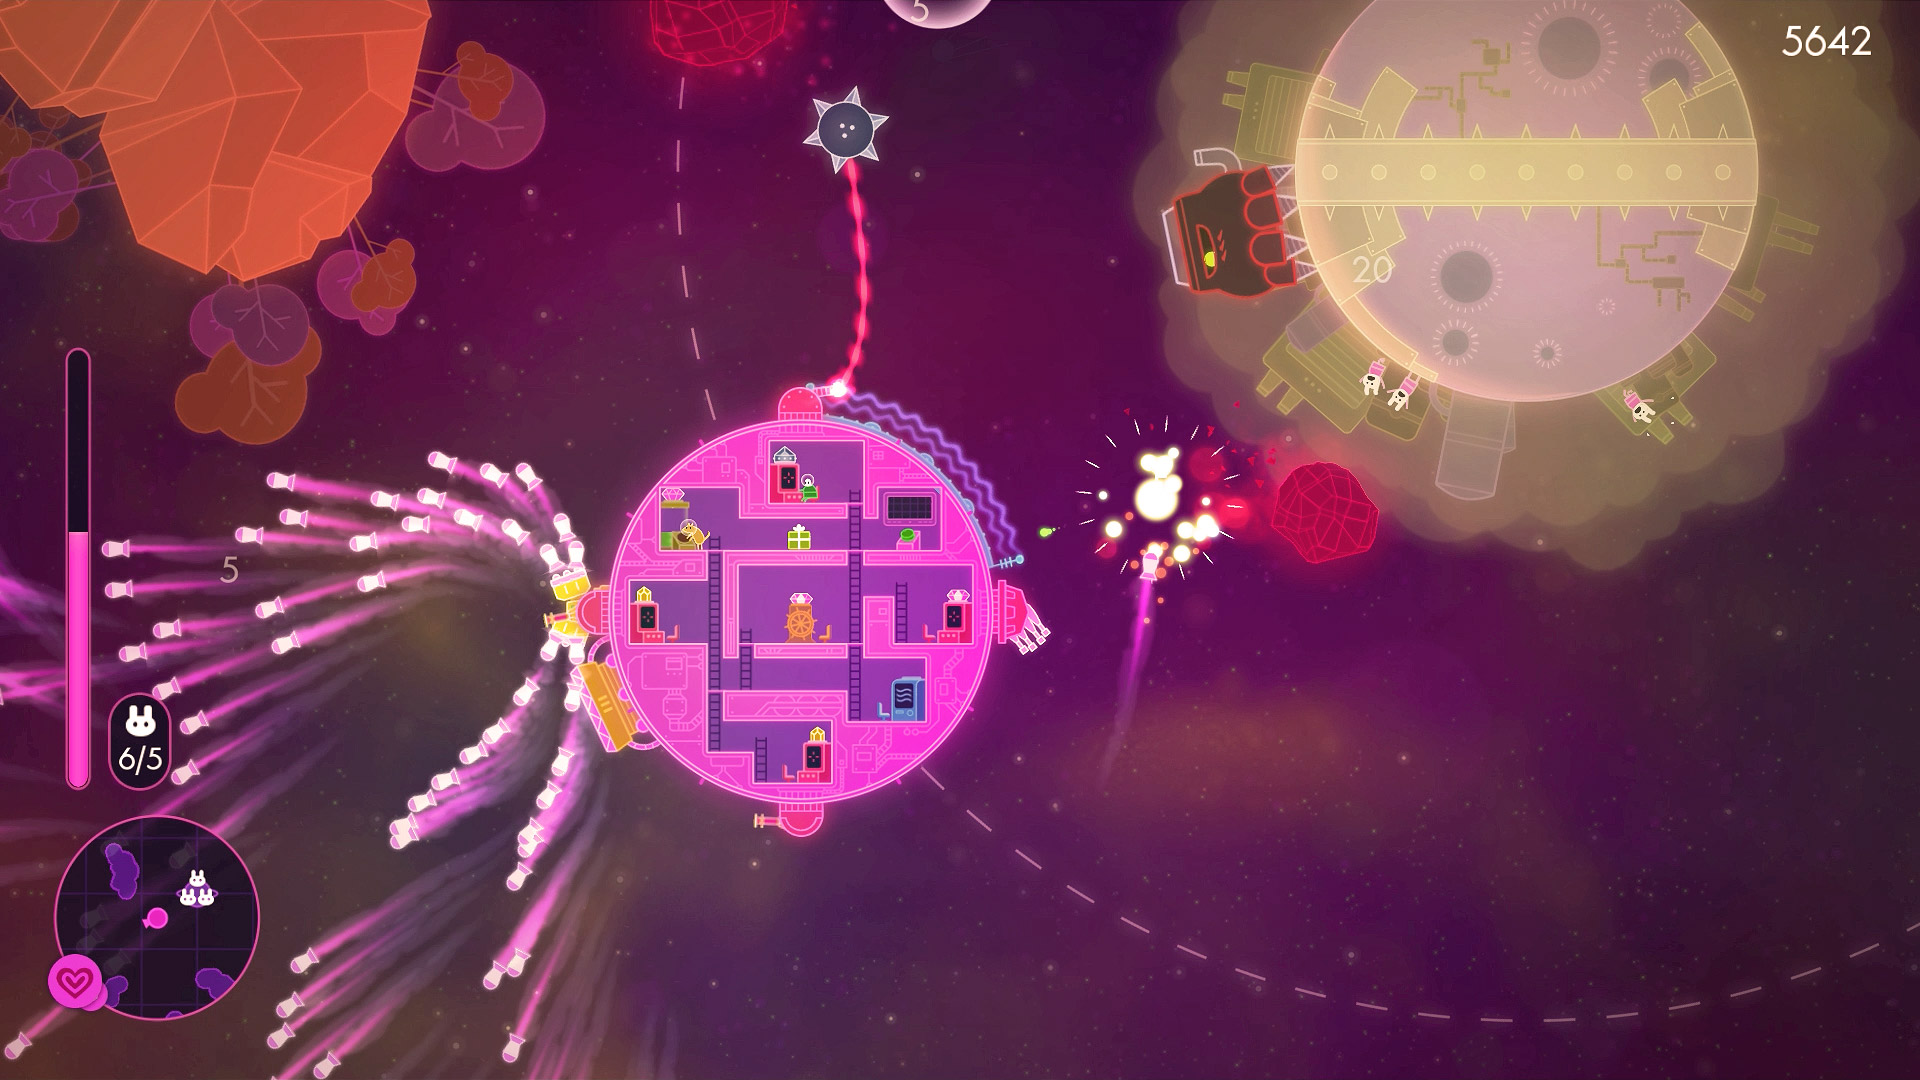 lovers in a dangerous spacetime ps4